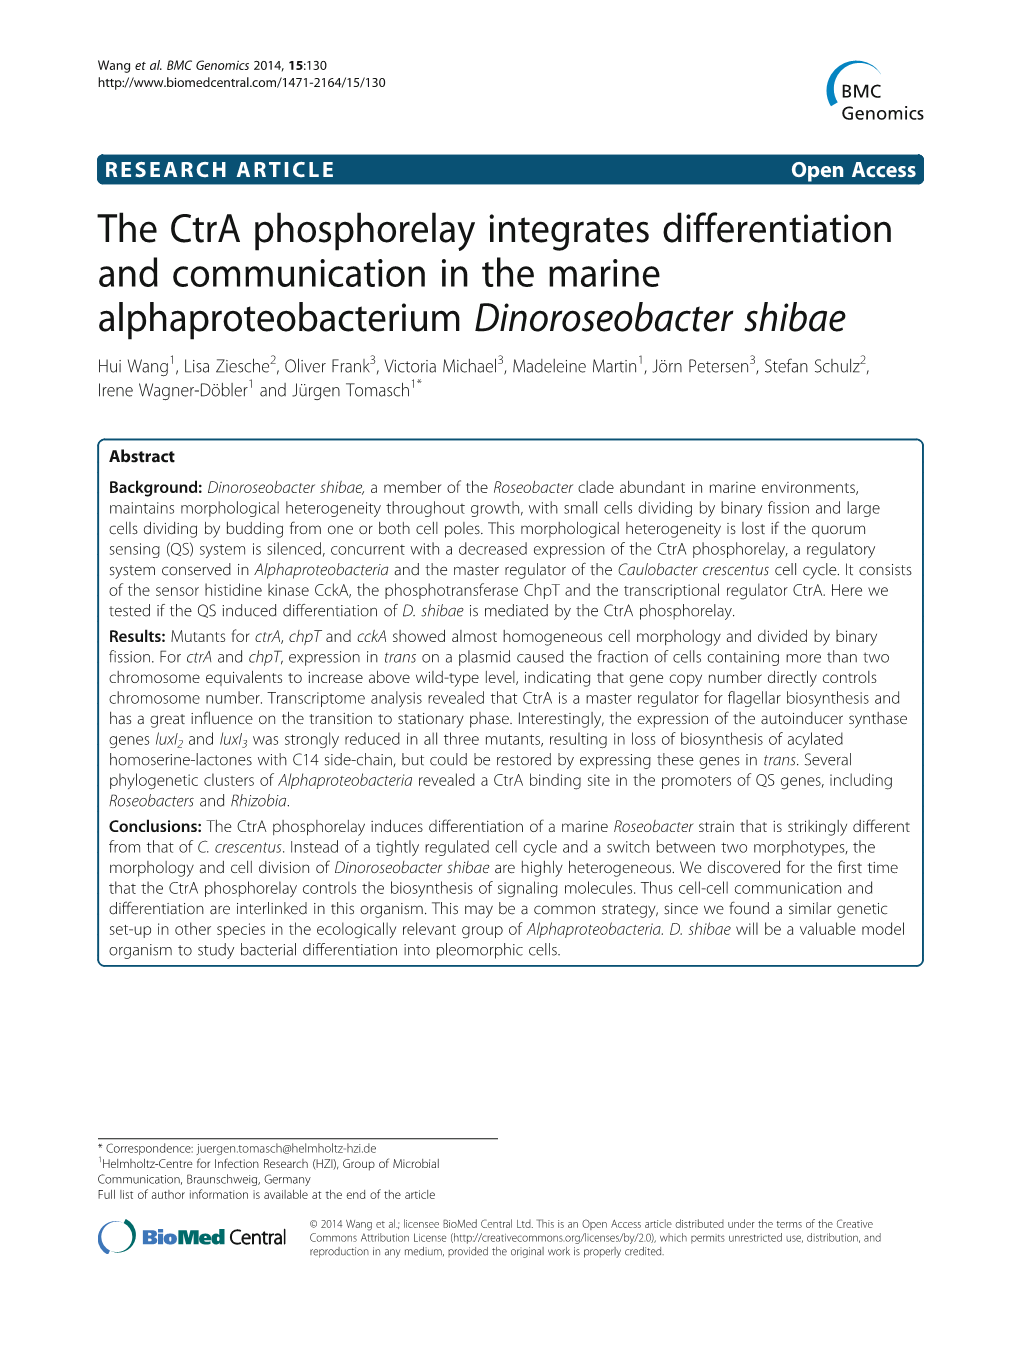 The Ctra Phosphorelay Integrates Differentiation and Communication